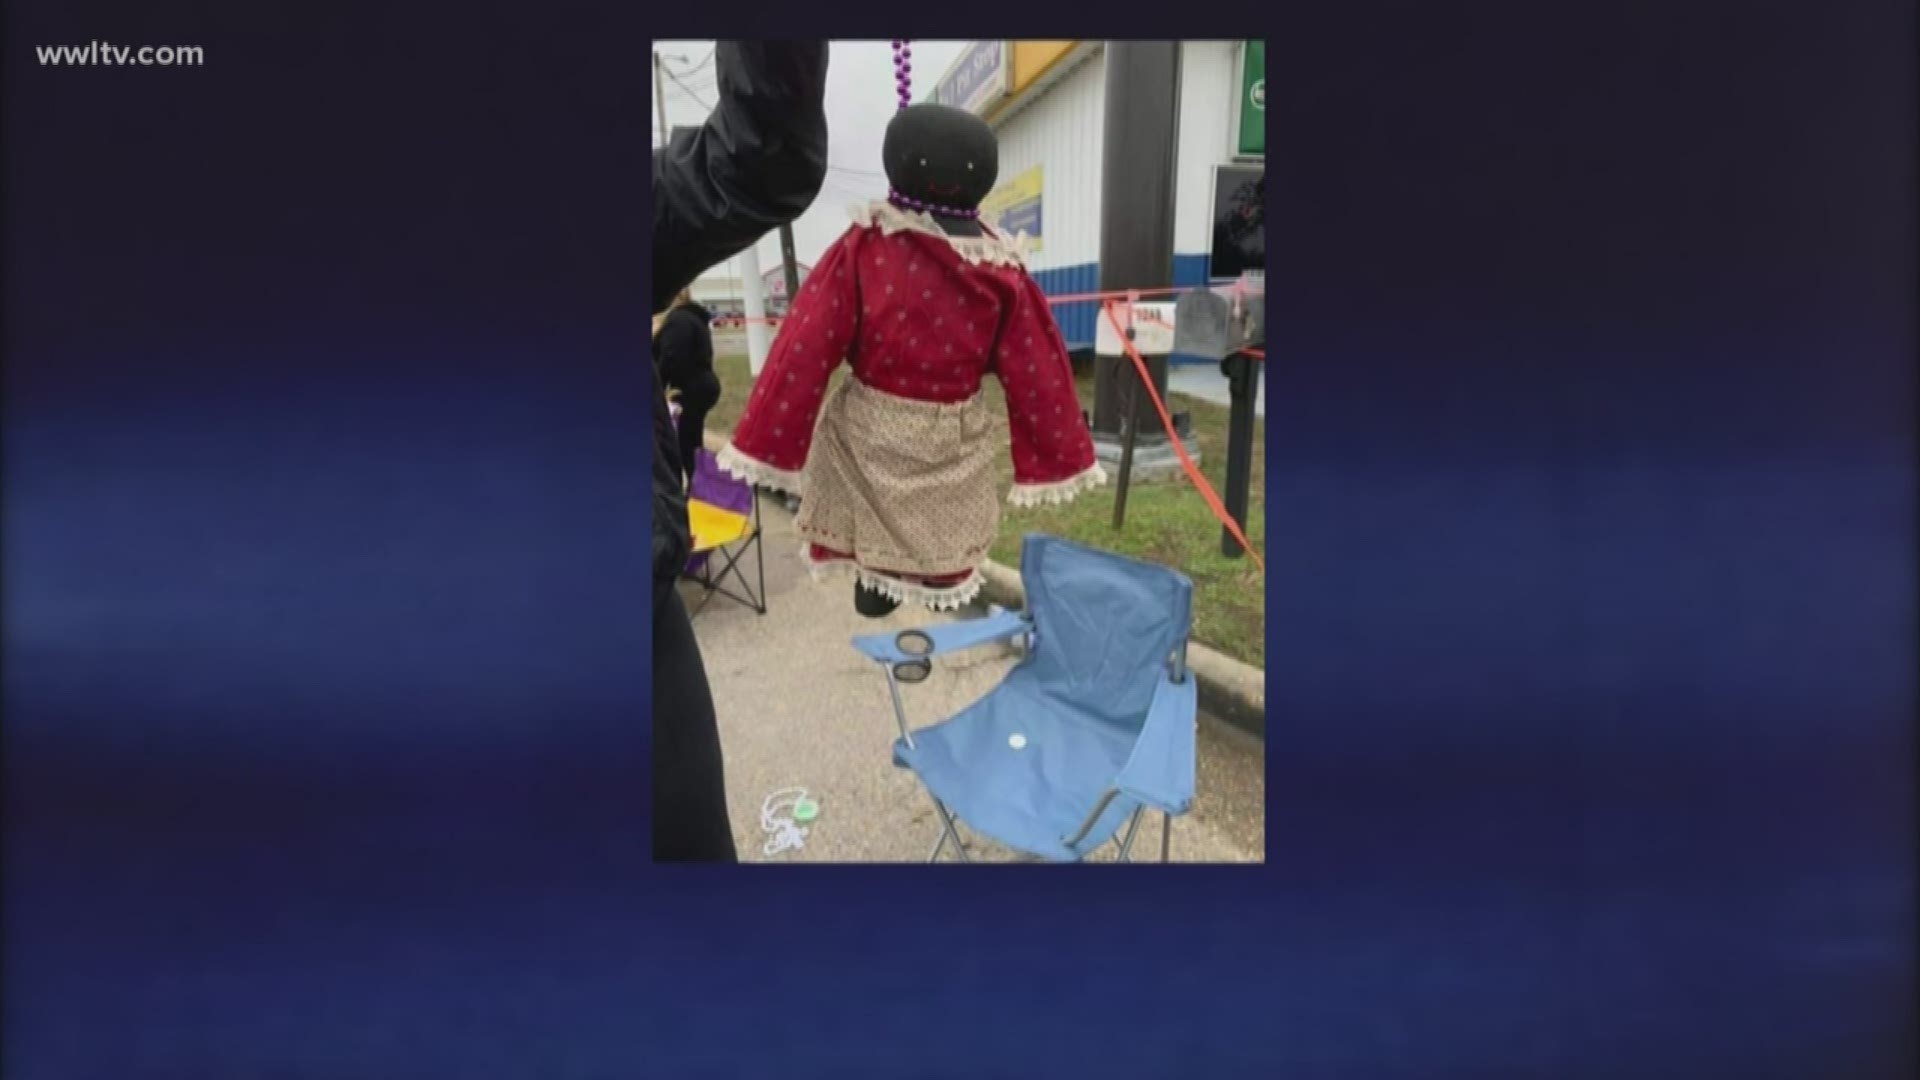 Police officials in Mississippi say a doll given to a child at a Carnival parade last month may have created controversy, but broke no city or state laws.